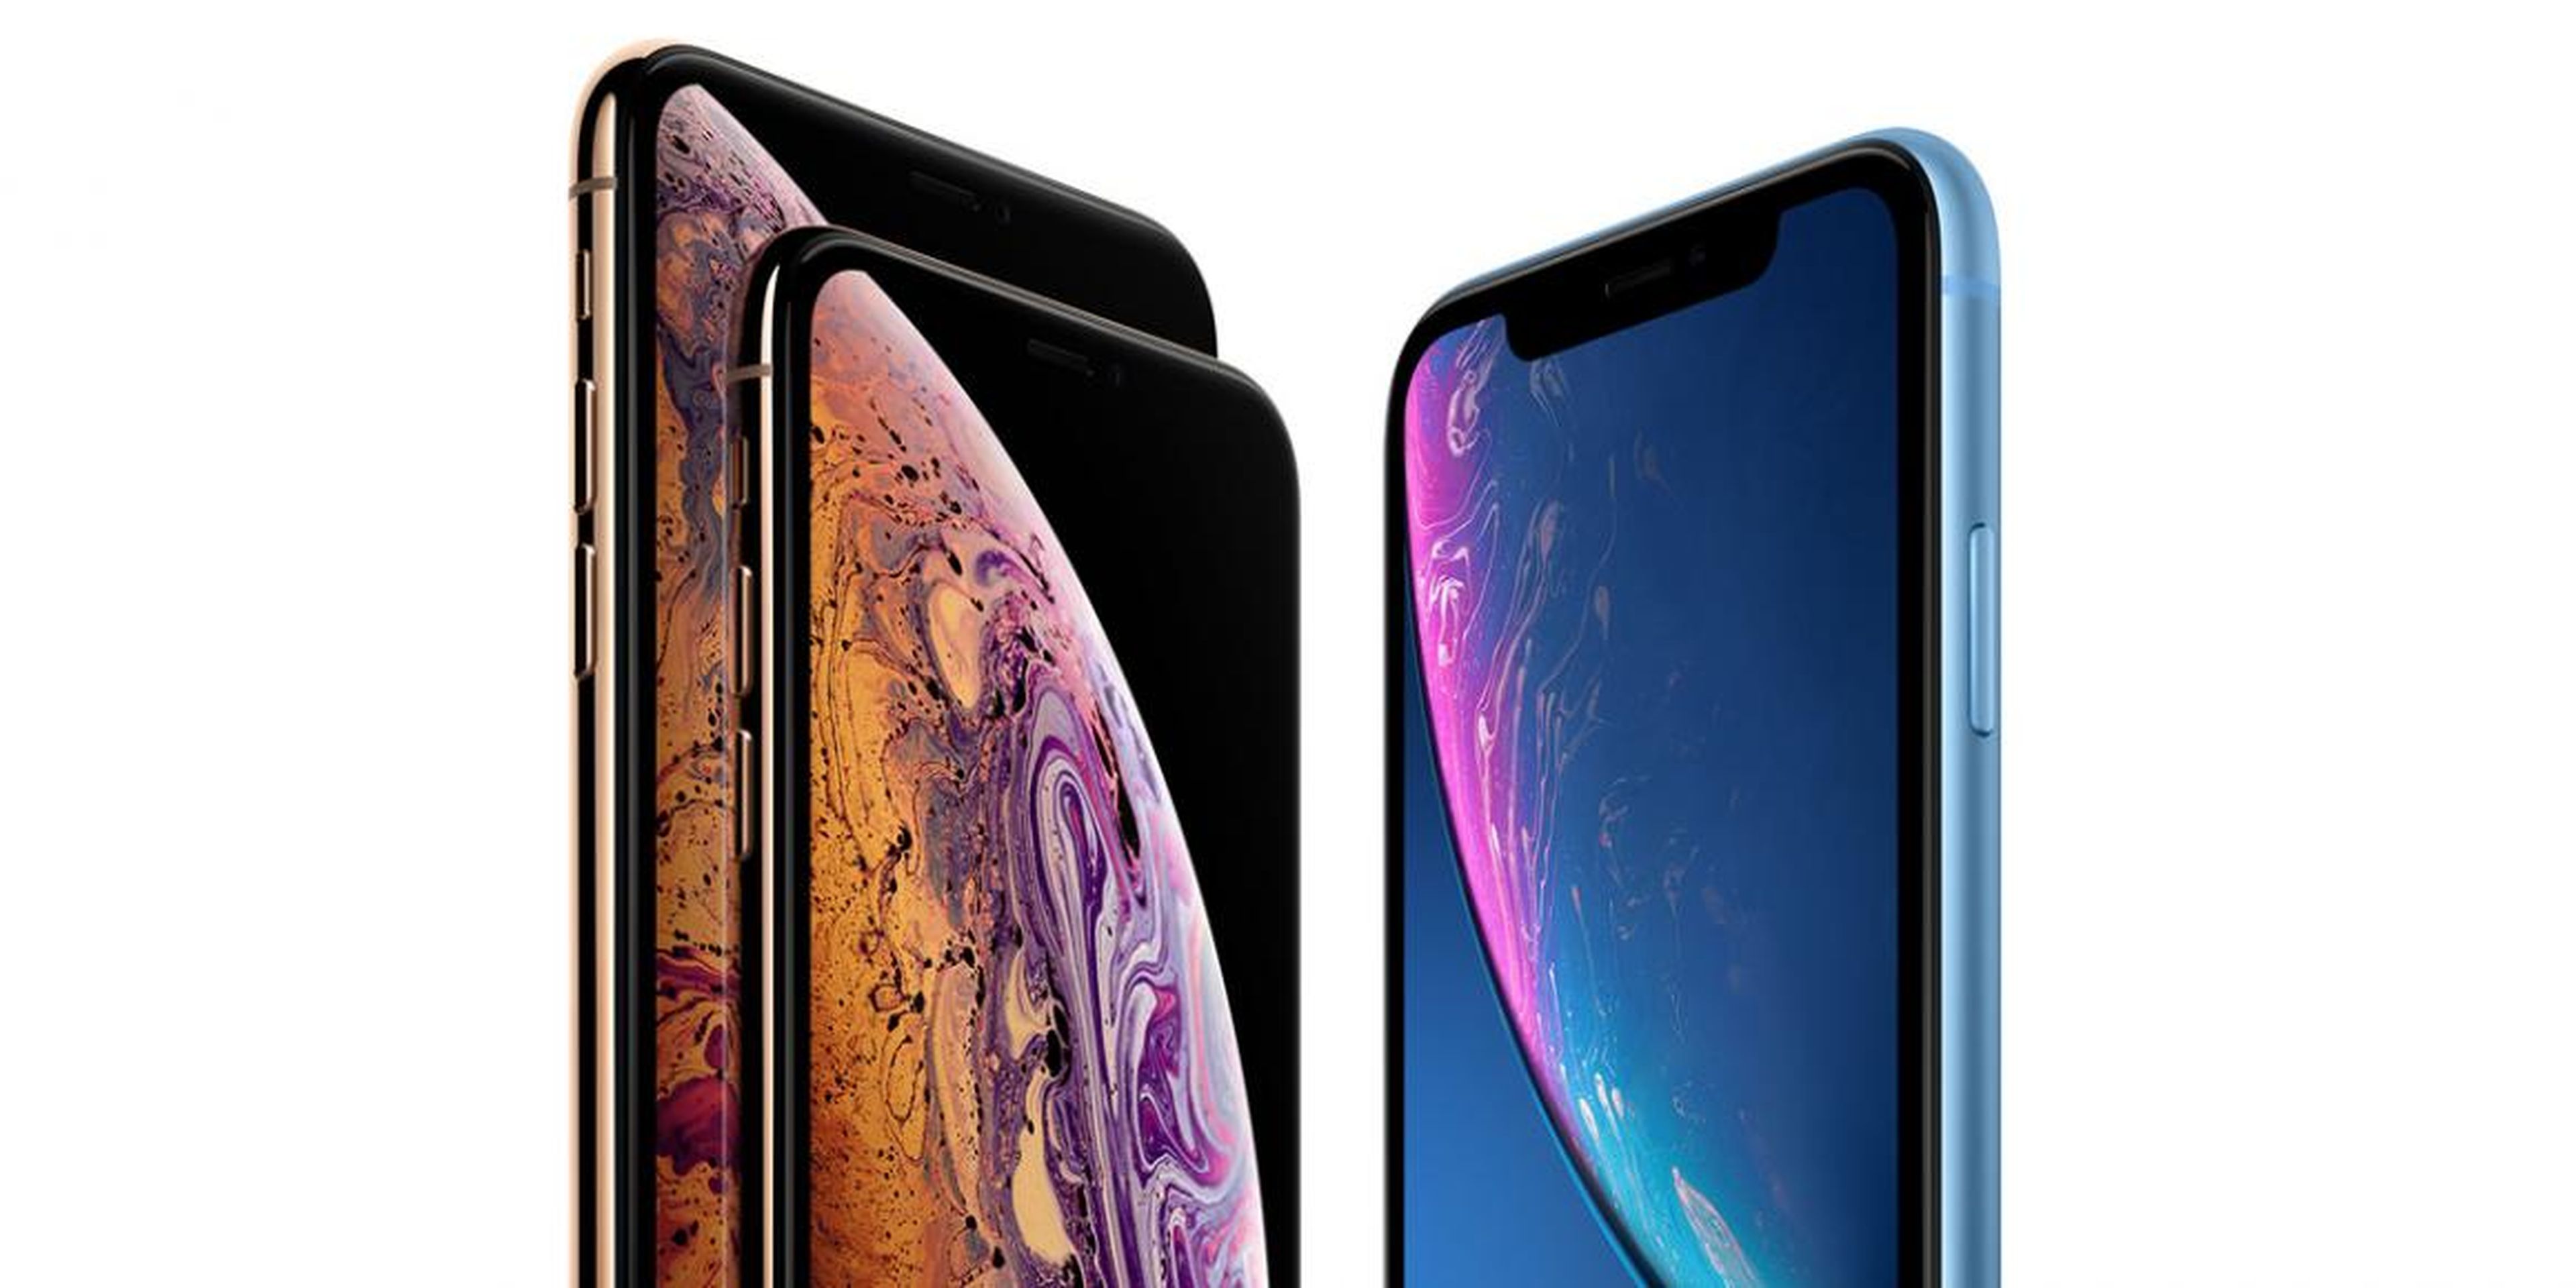 Apple released 3 new iPhones that all look the same — here are the major differences